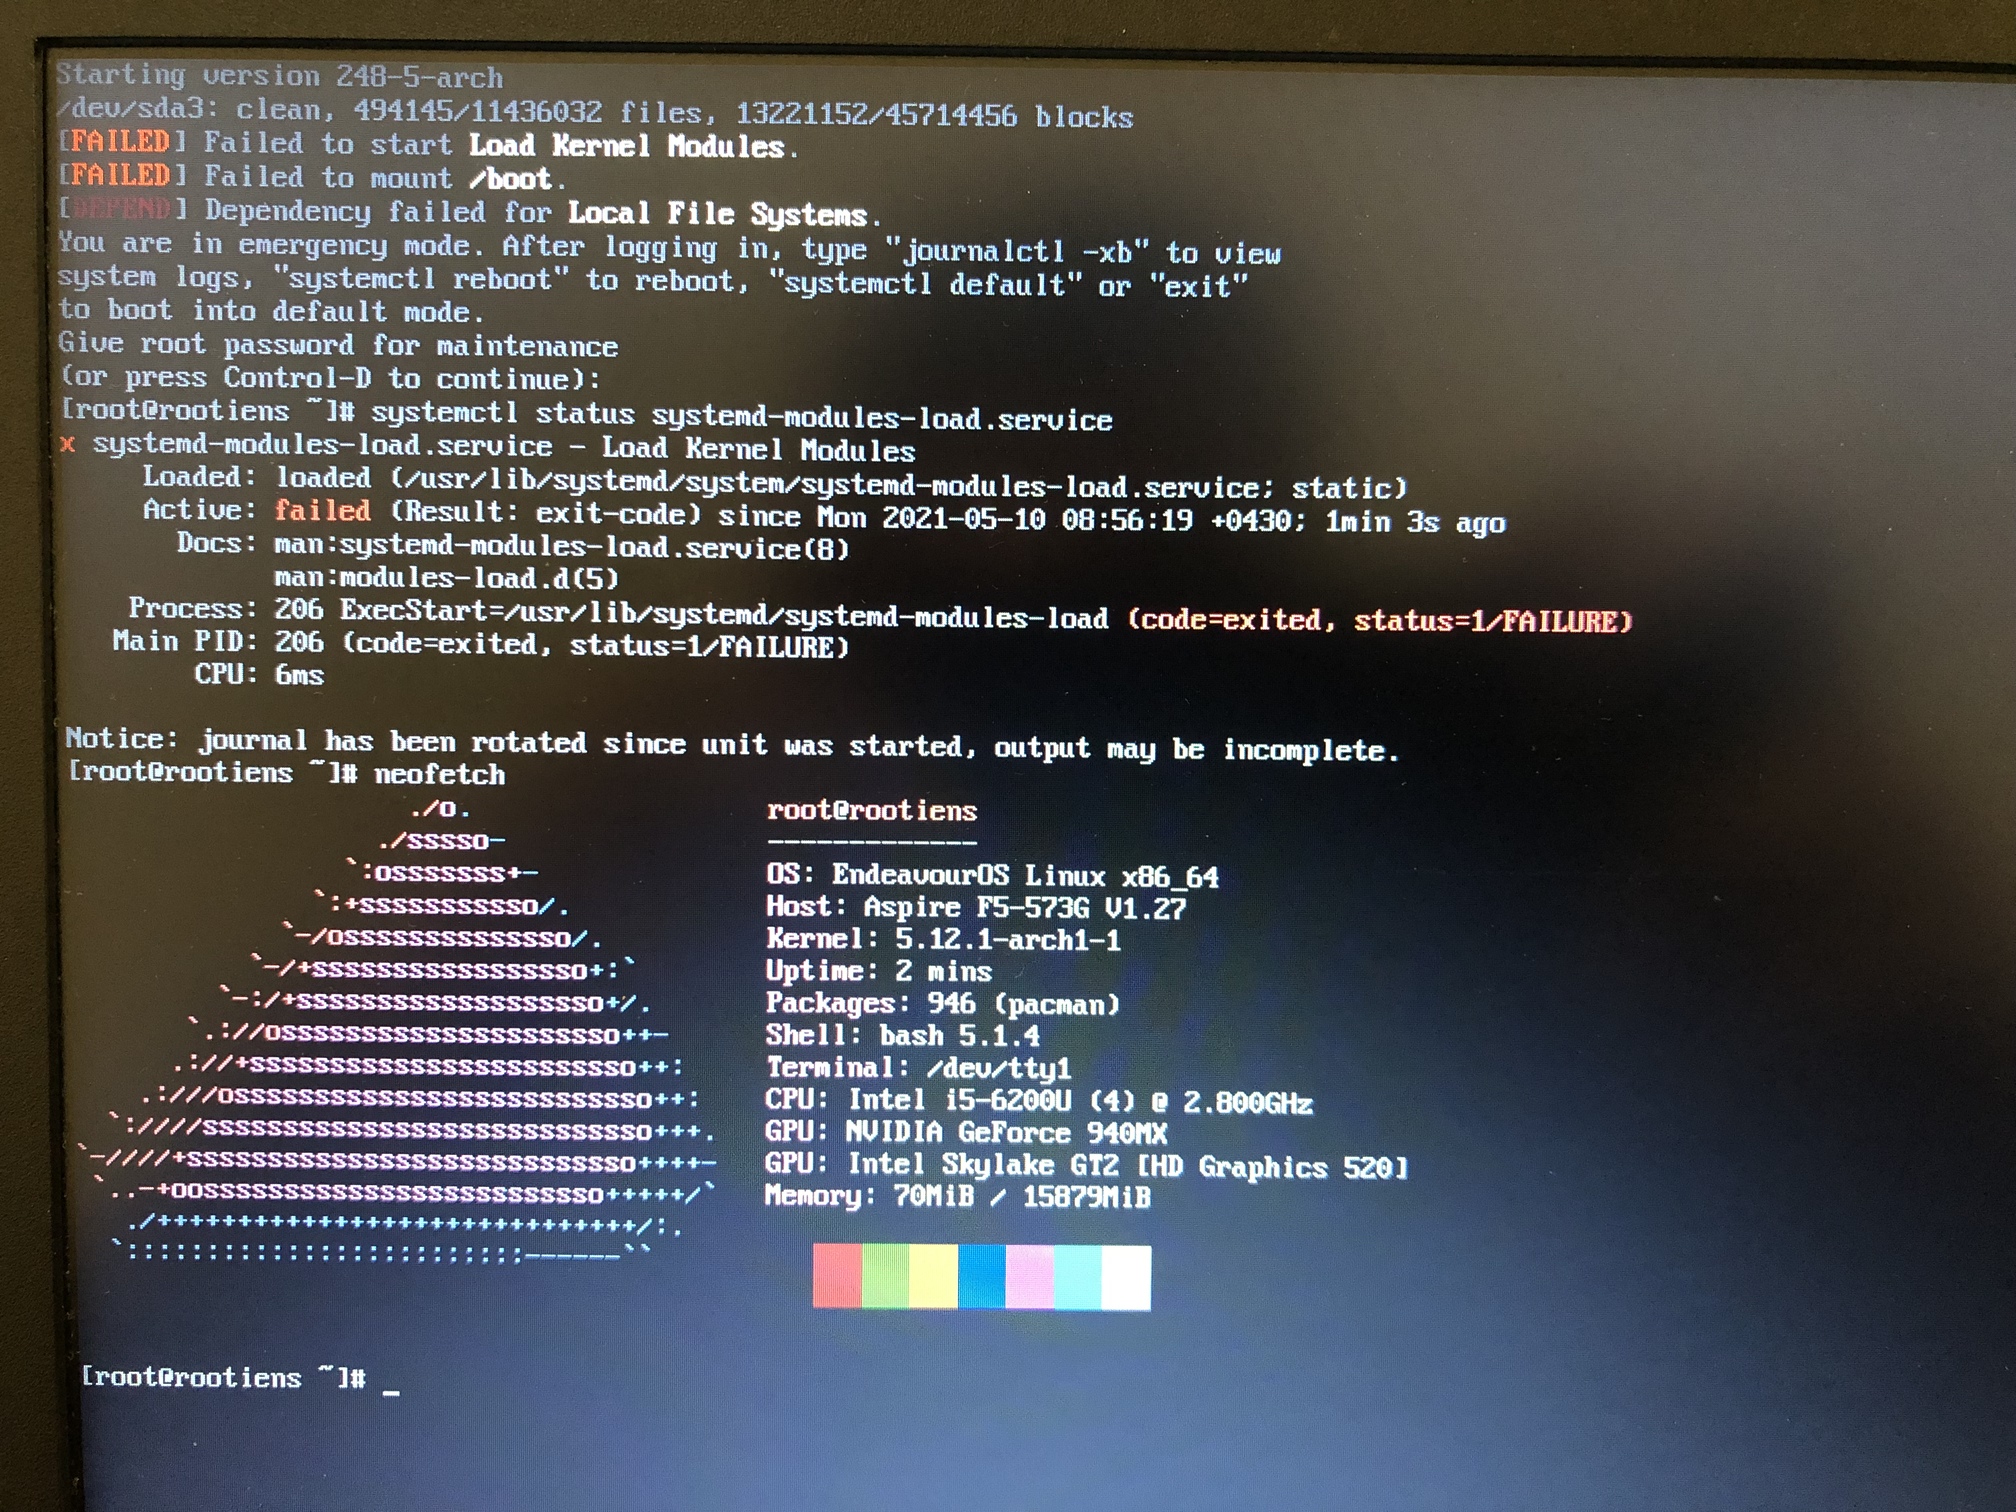 Start kernel. Systemd Boot archlinux. Ubuntu 22.04 failed to start LSB: VIRTUALBOX Linux Kernel Module.. ASUSTOR booting image' Error: no such device: you need to load the Kernel first. Error: no loaded Kernel.. Restart the Kernel(with dialog).